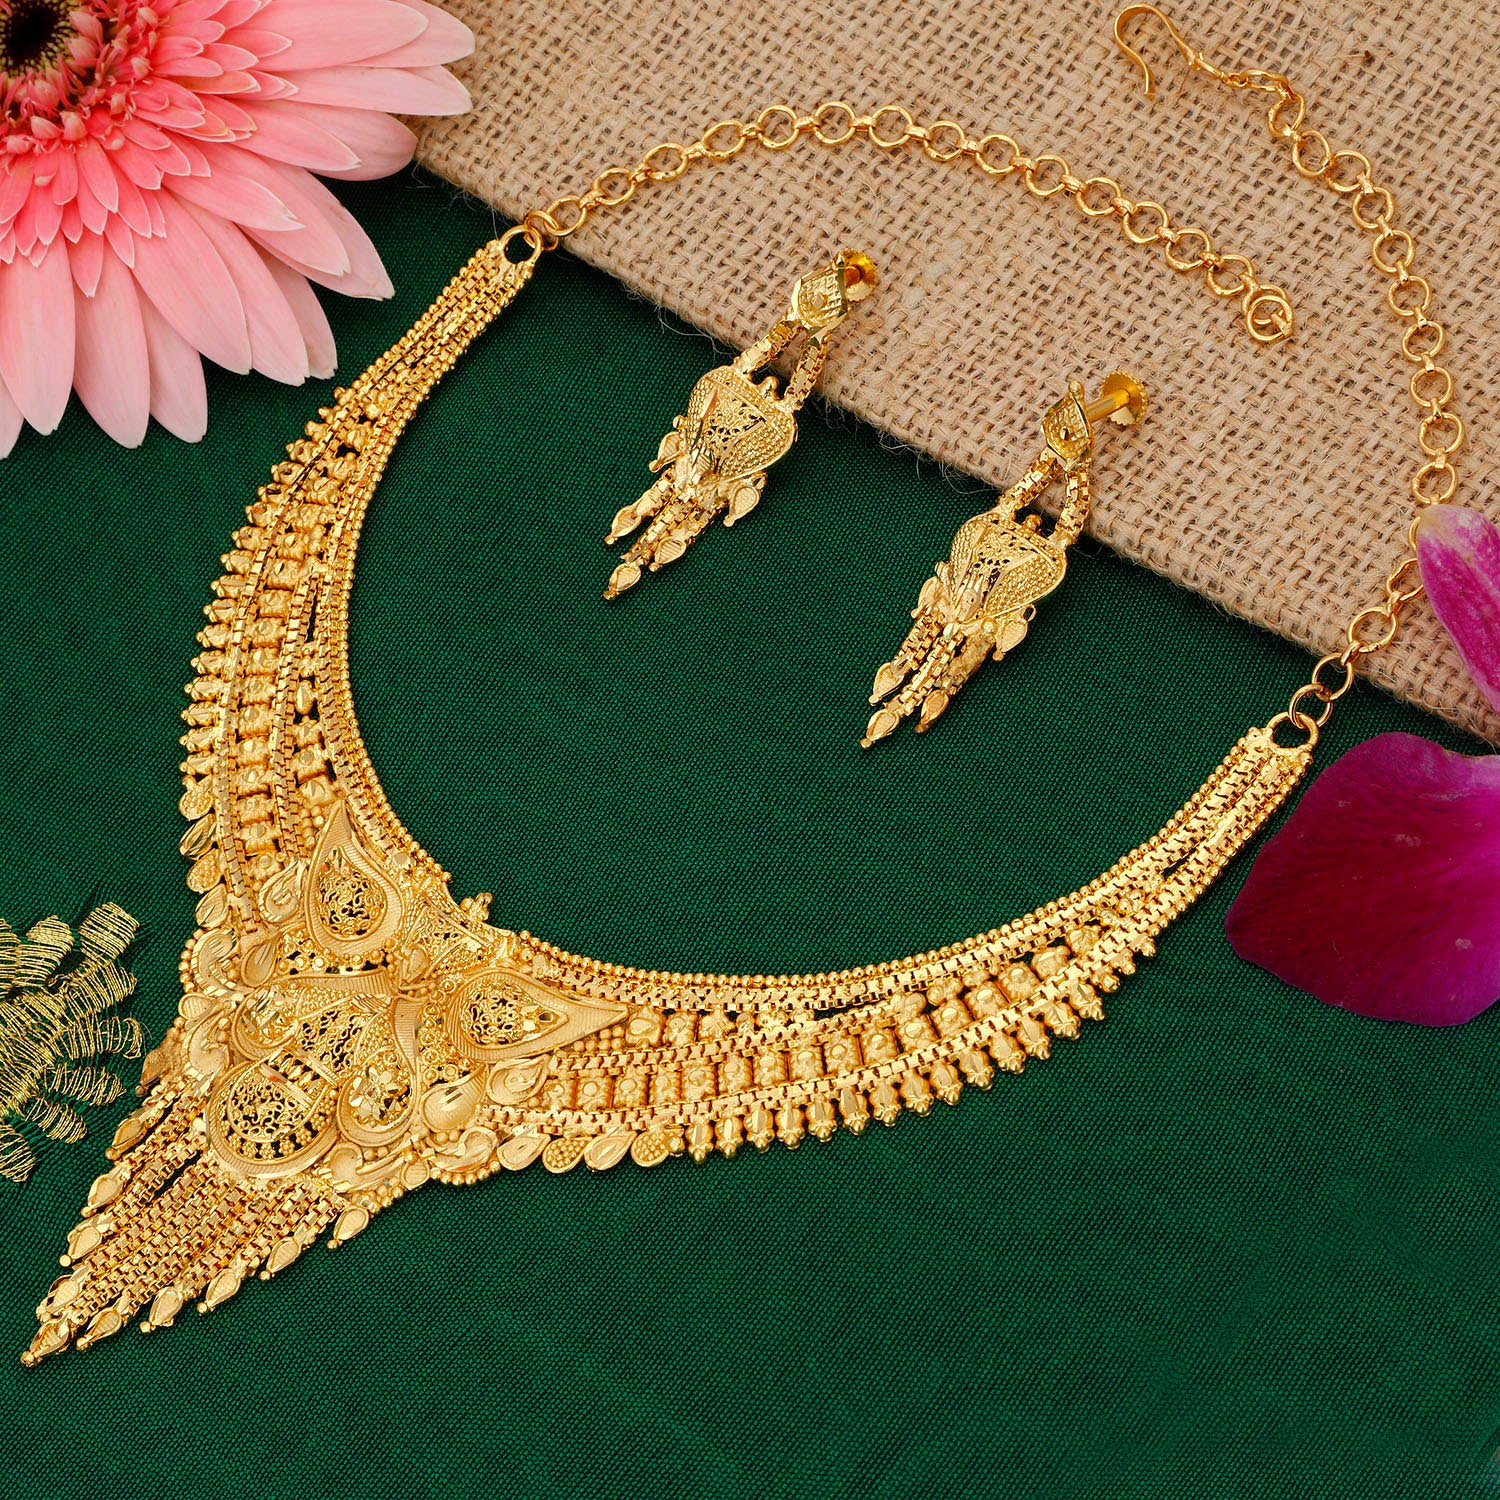 AADI SPECIAL OFFER | Offer, Gold jewelry, How to apply